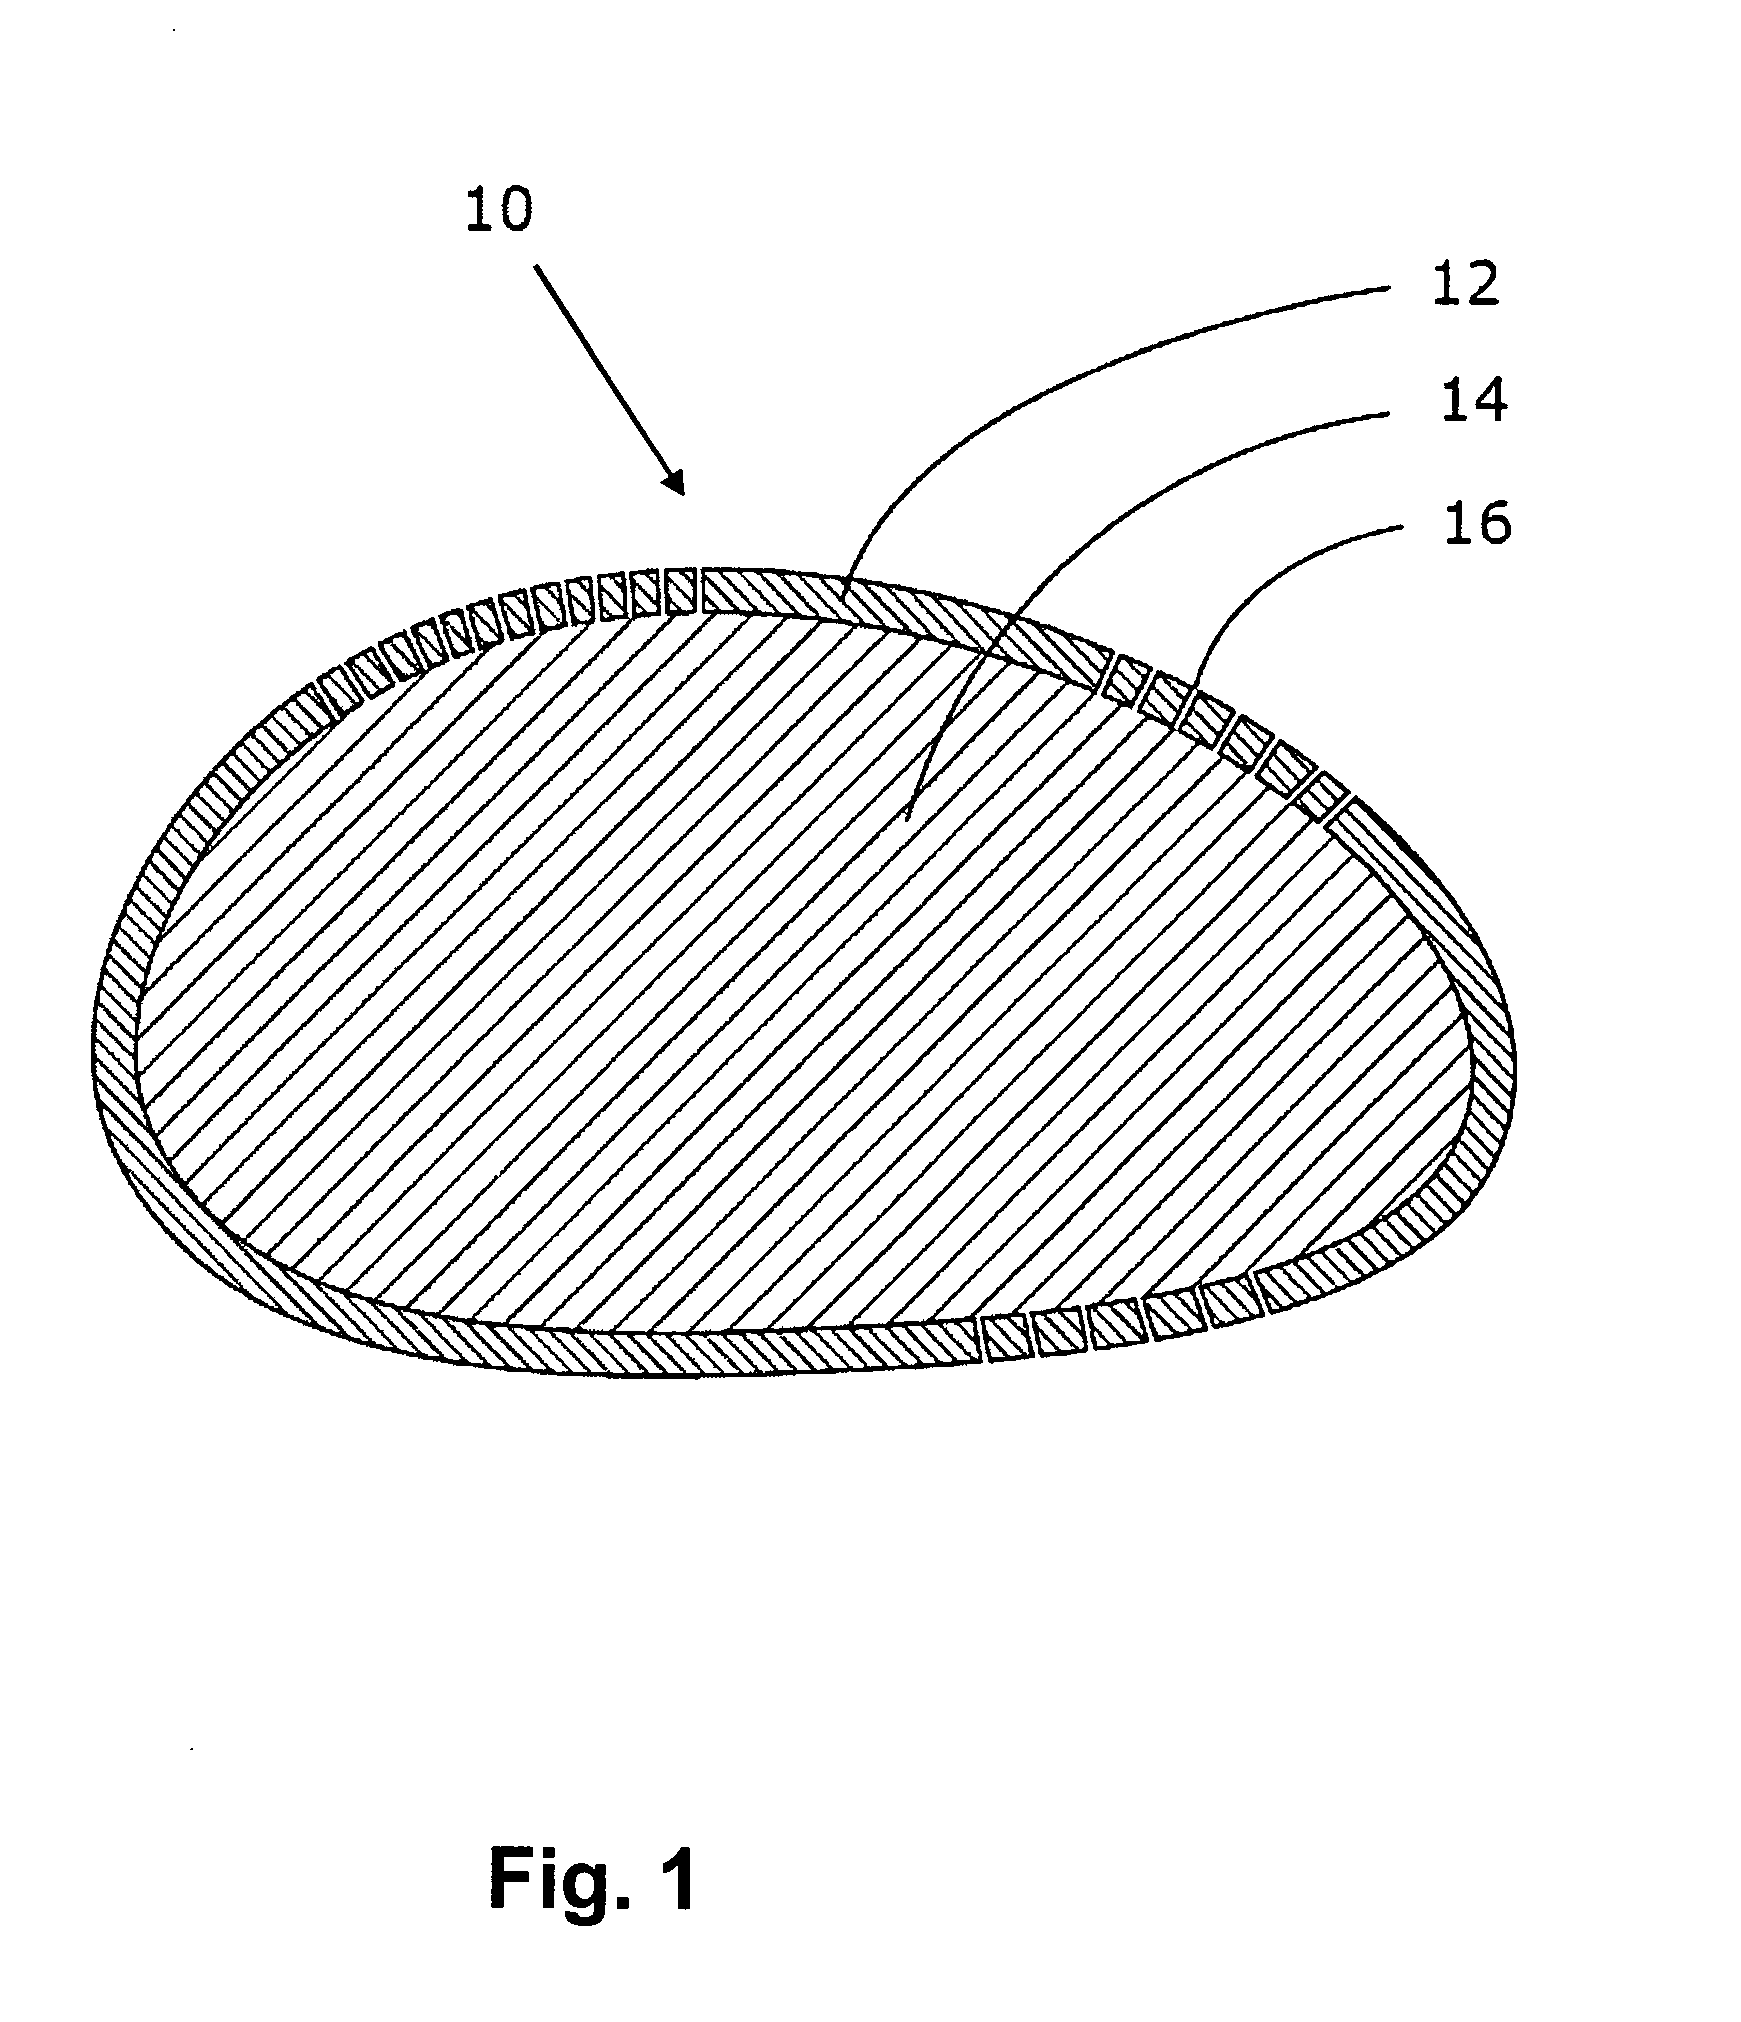 Biocompatible implant system and method